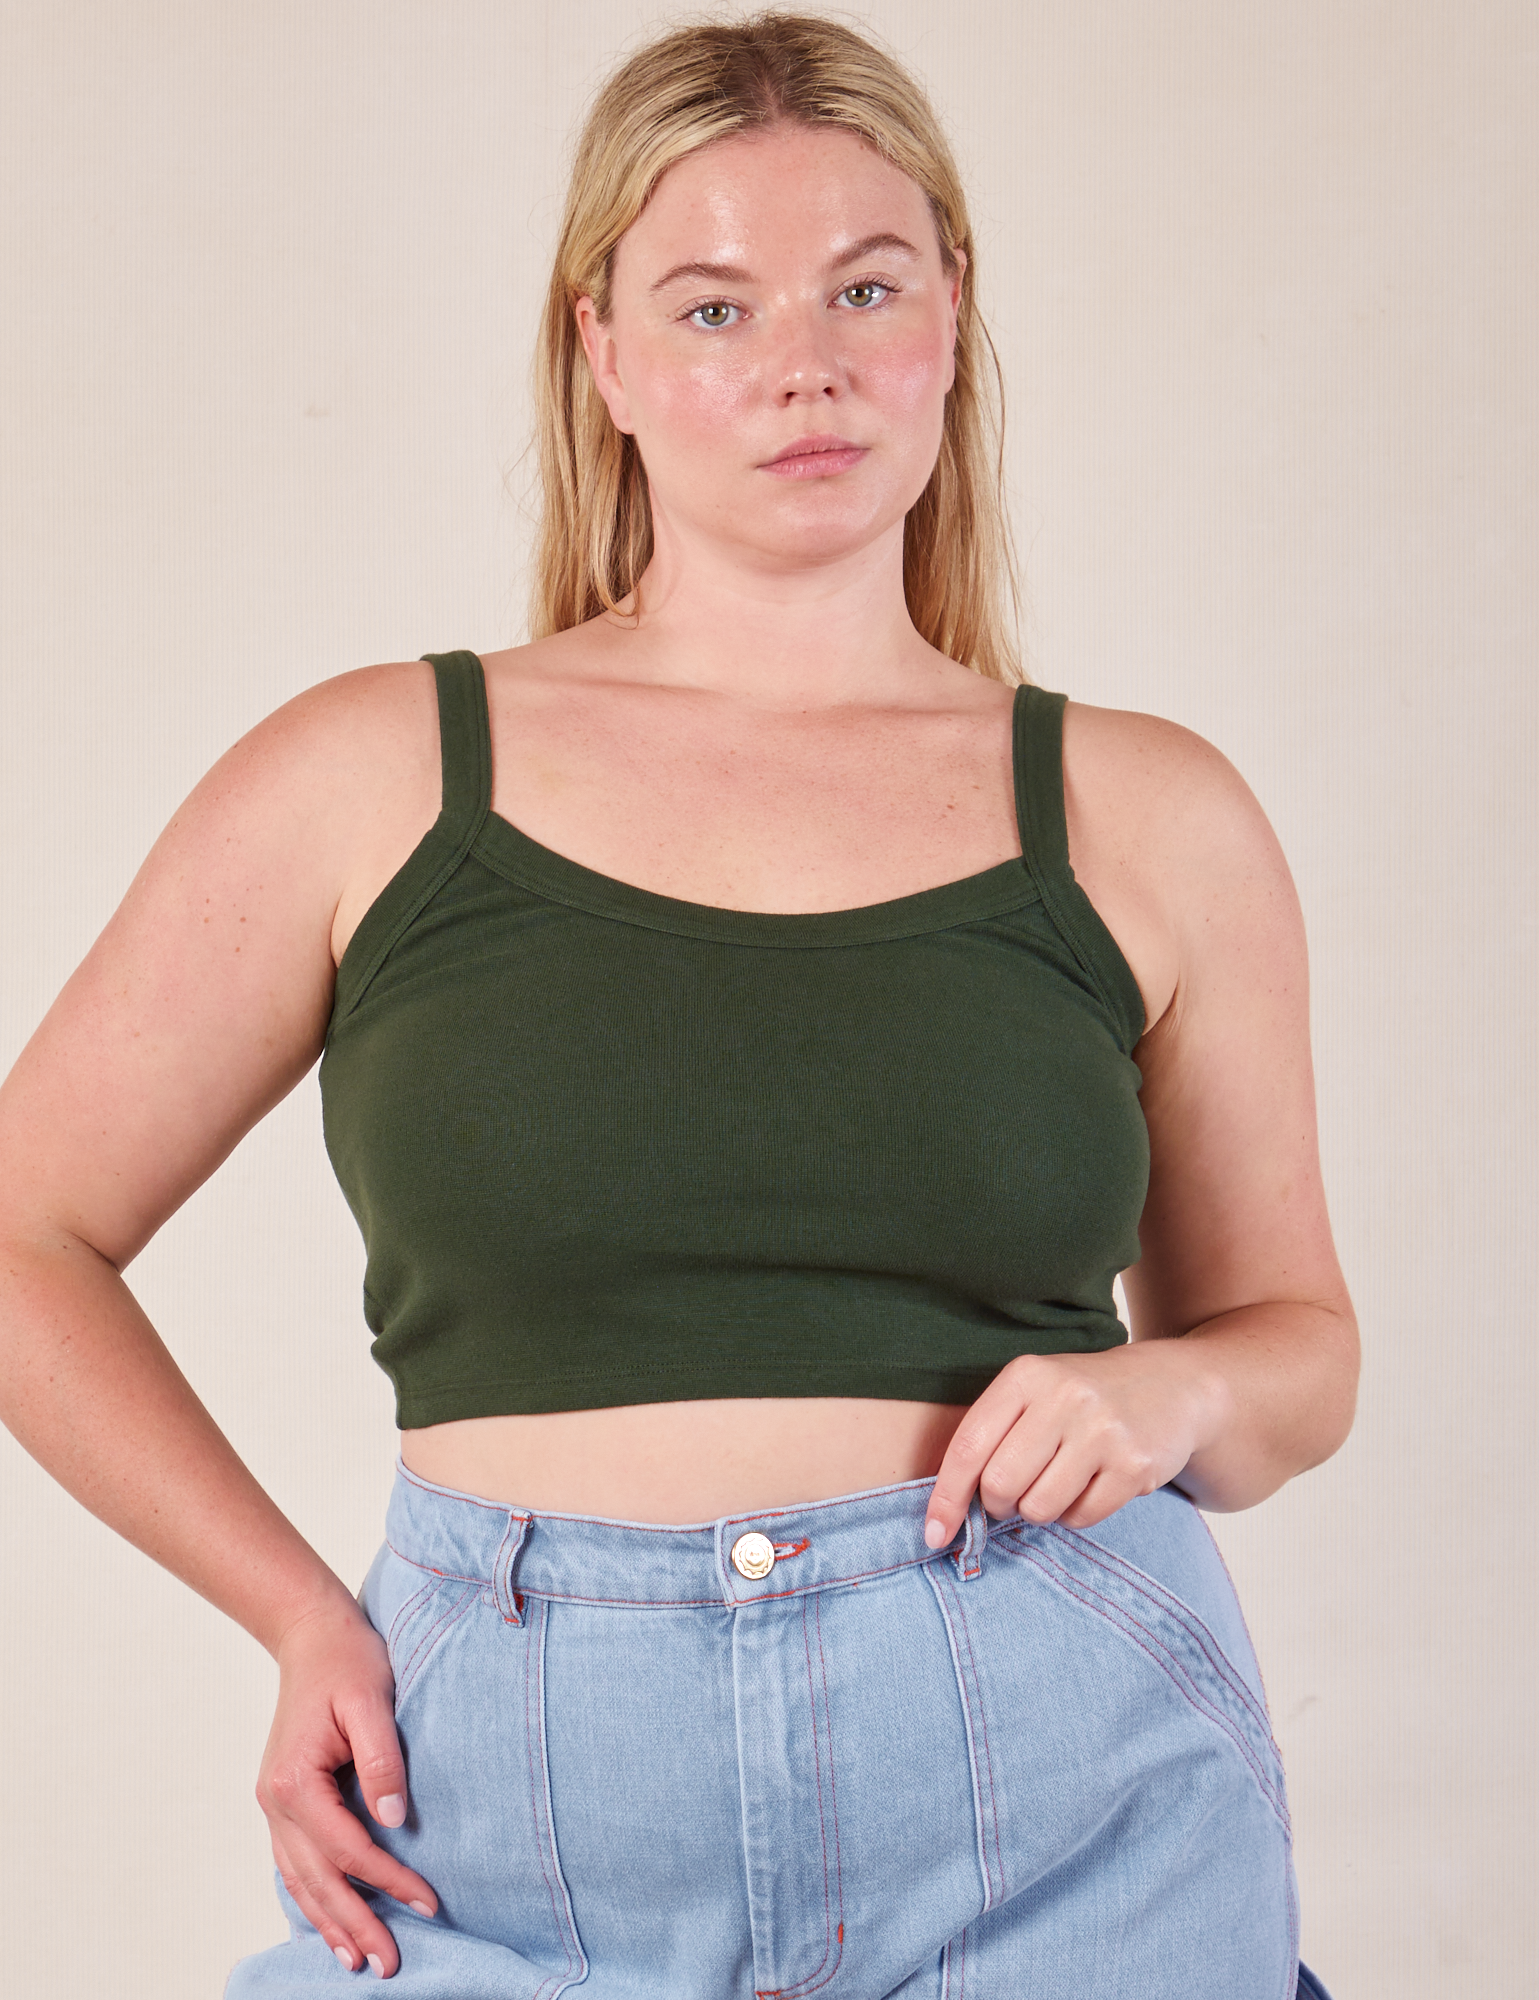 Lish is 5’8” and wearing M Cropped Cami in Swamp Green